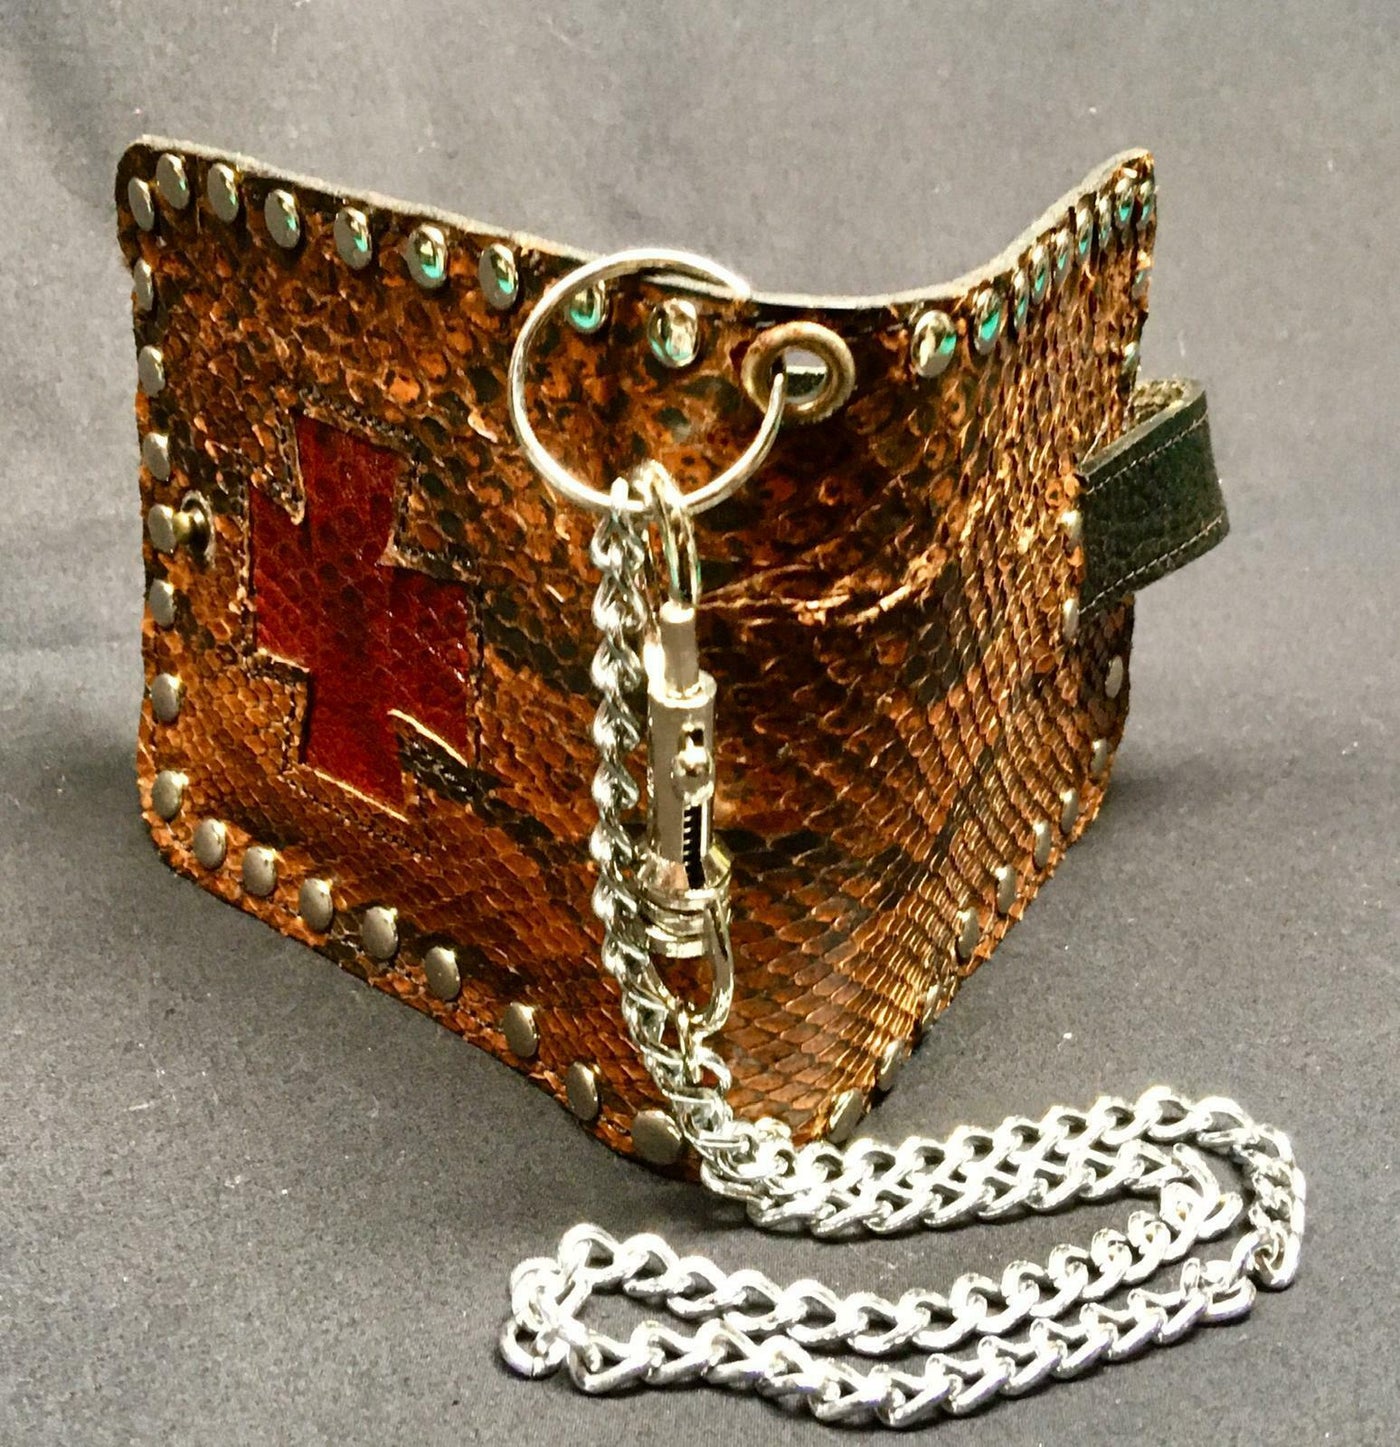 Iron Cross Genuine Python and Leather Wallet